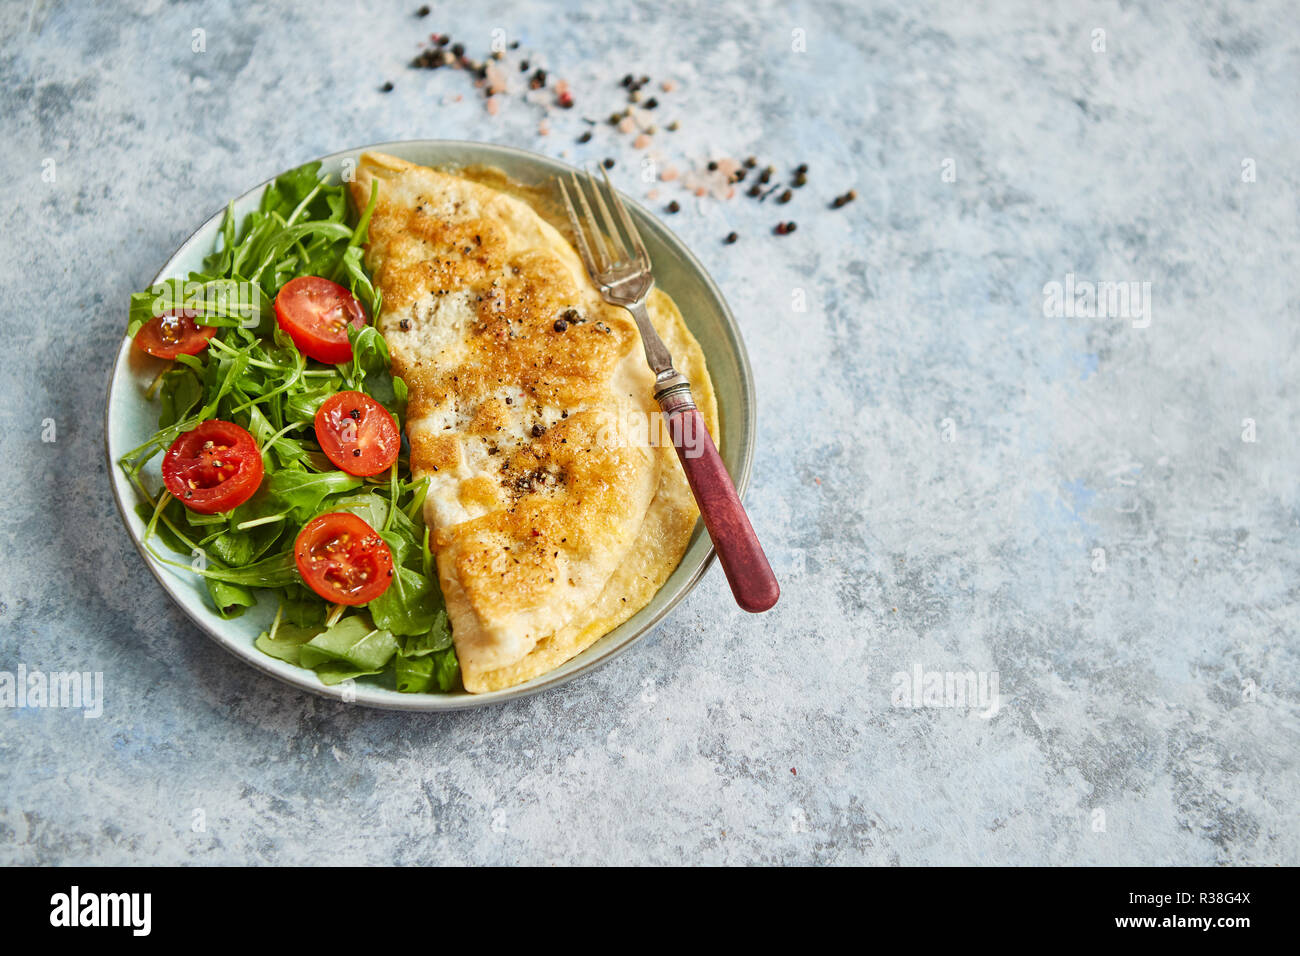 Classic egg omelette served with cherry tomato and arugula salad on side Stock Photo